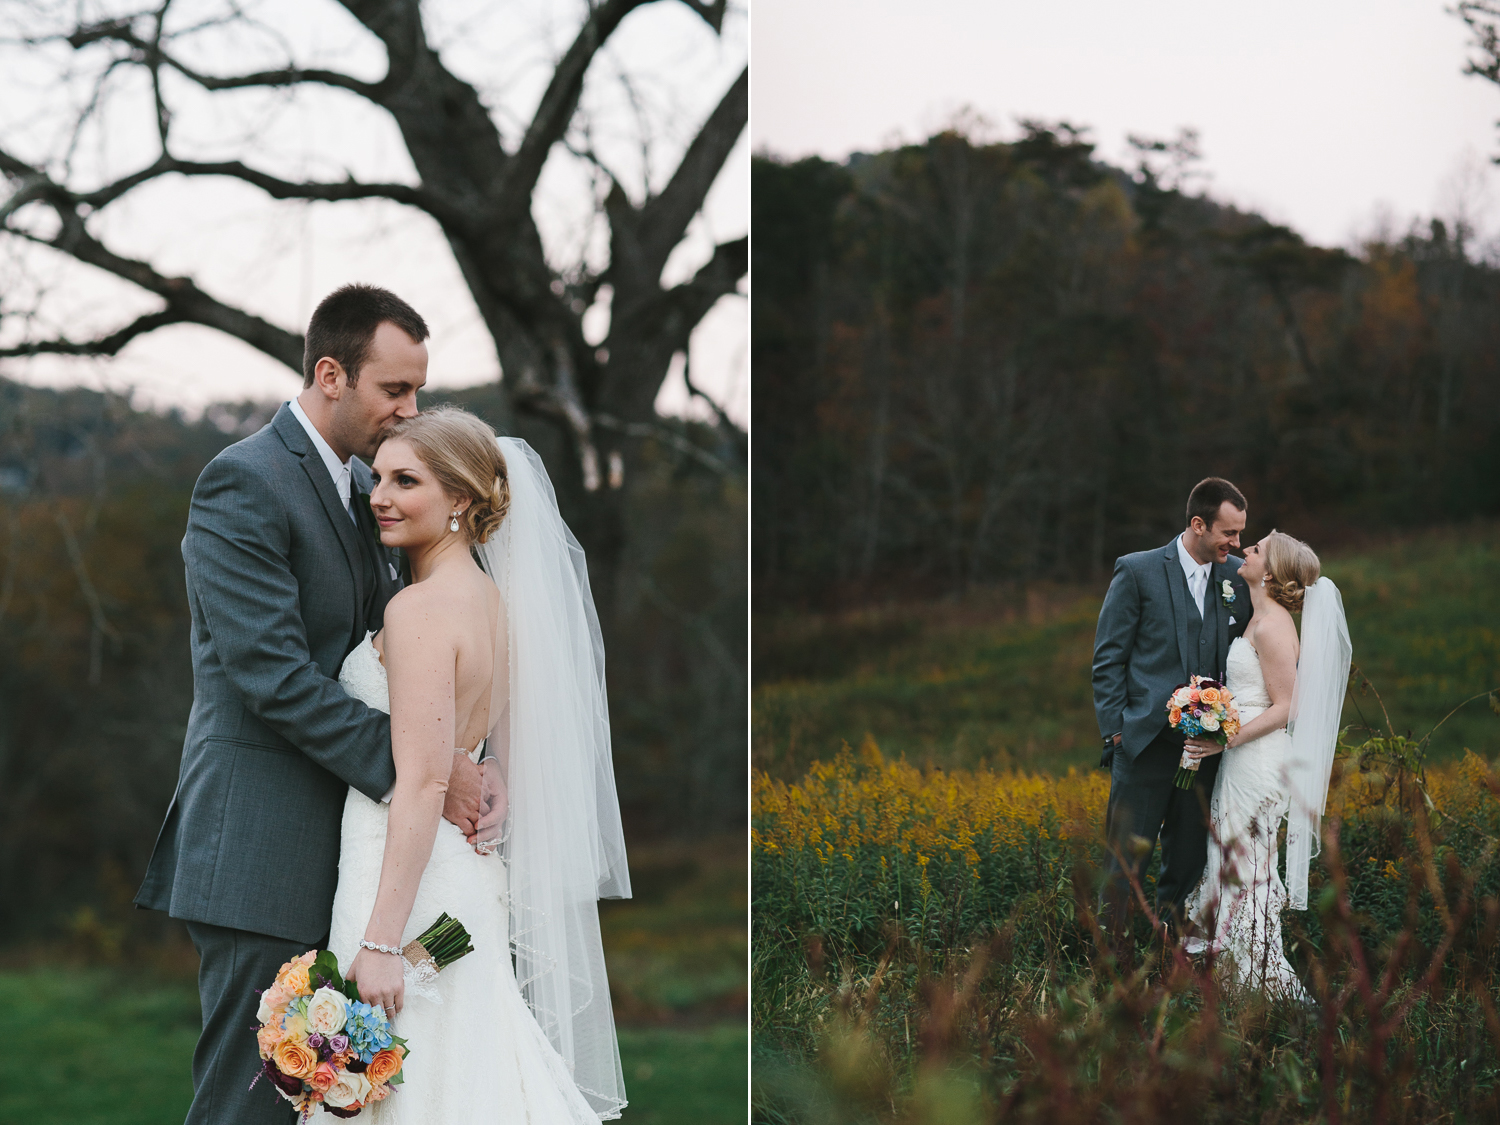 Beautiful outdoor portraits of bride and groom